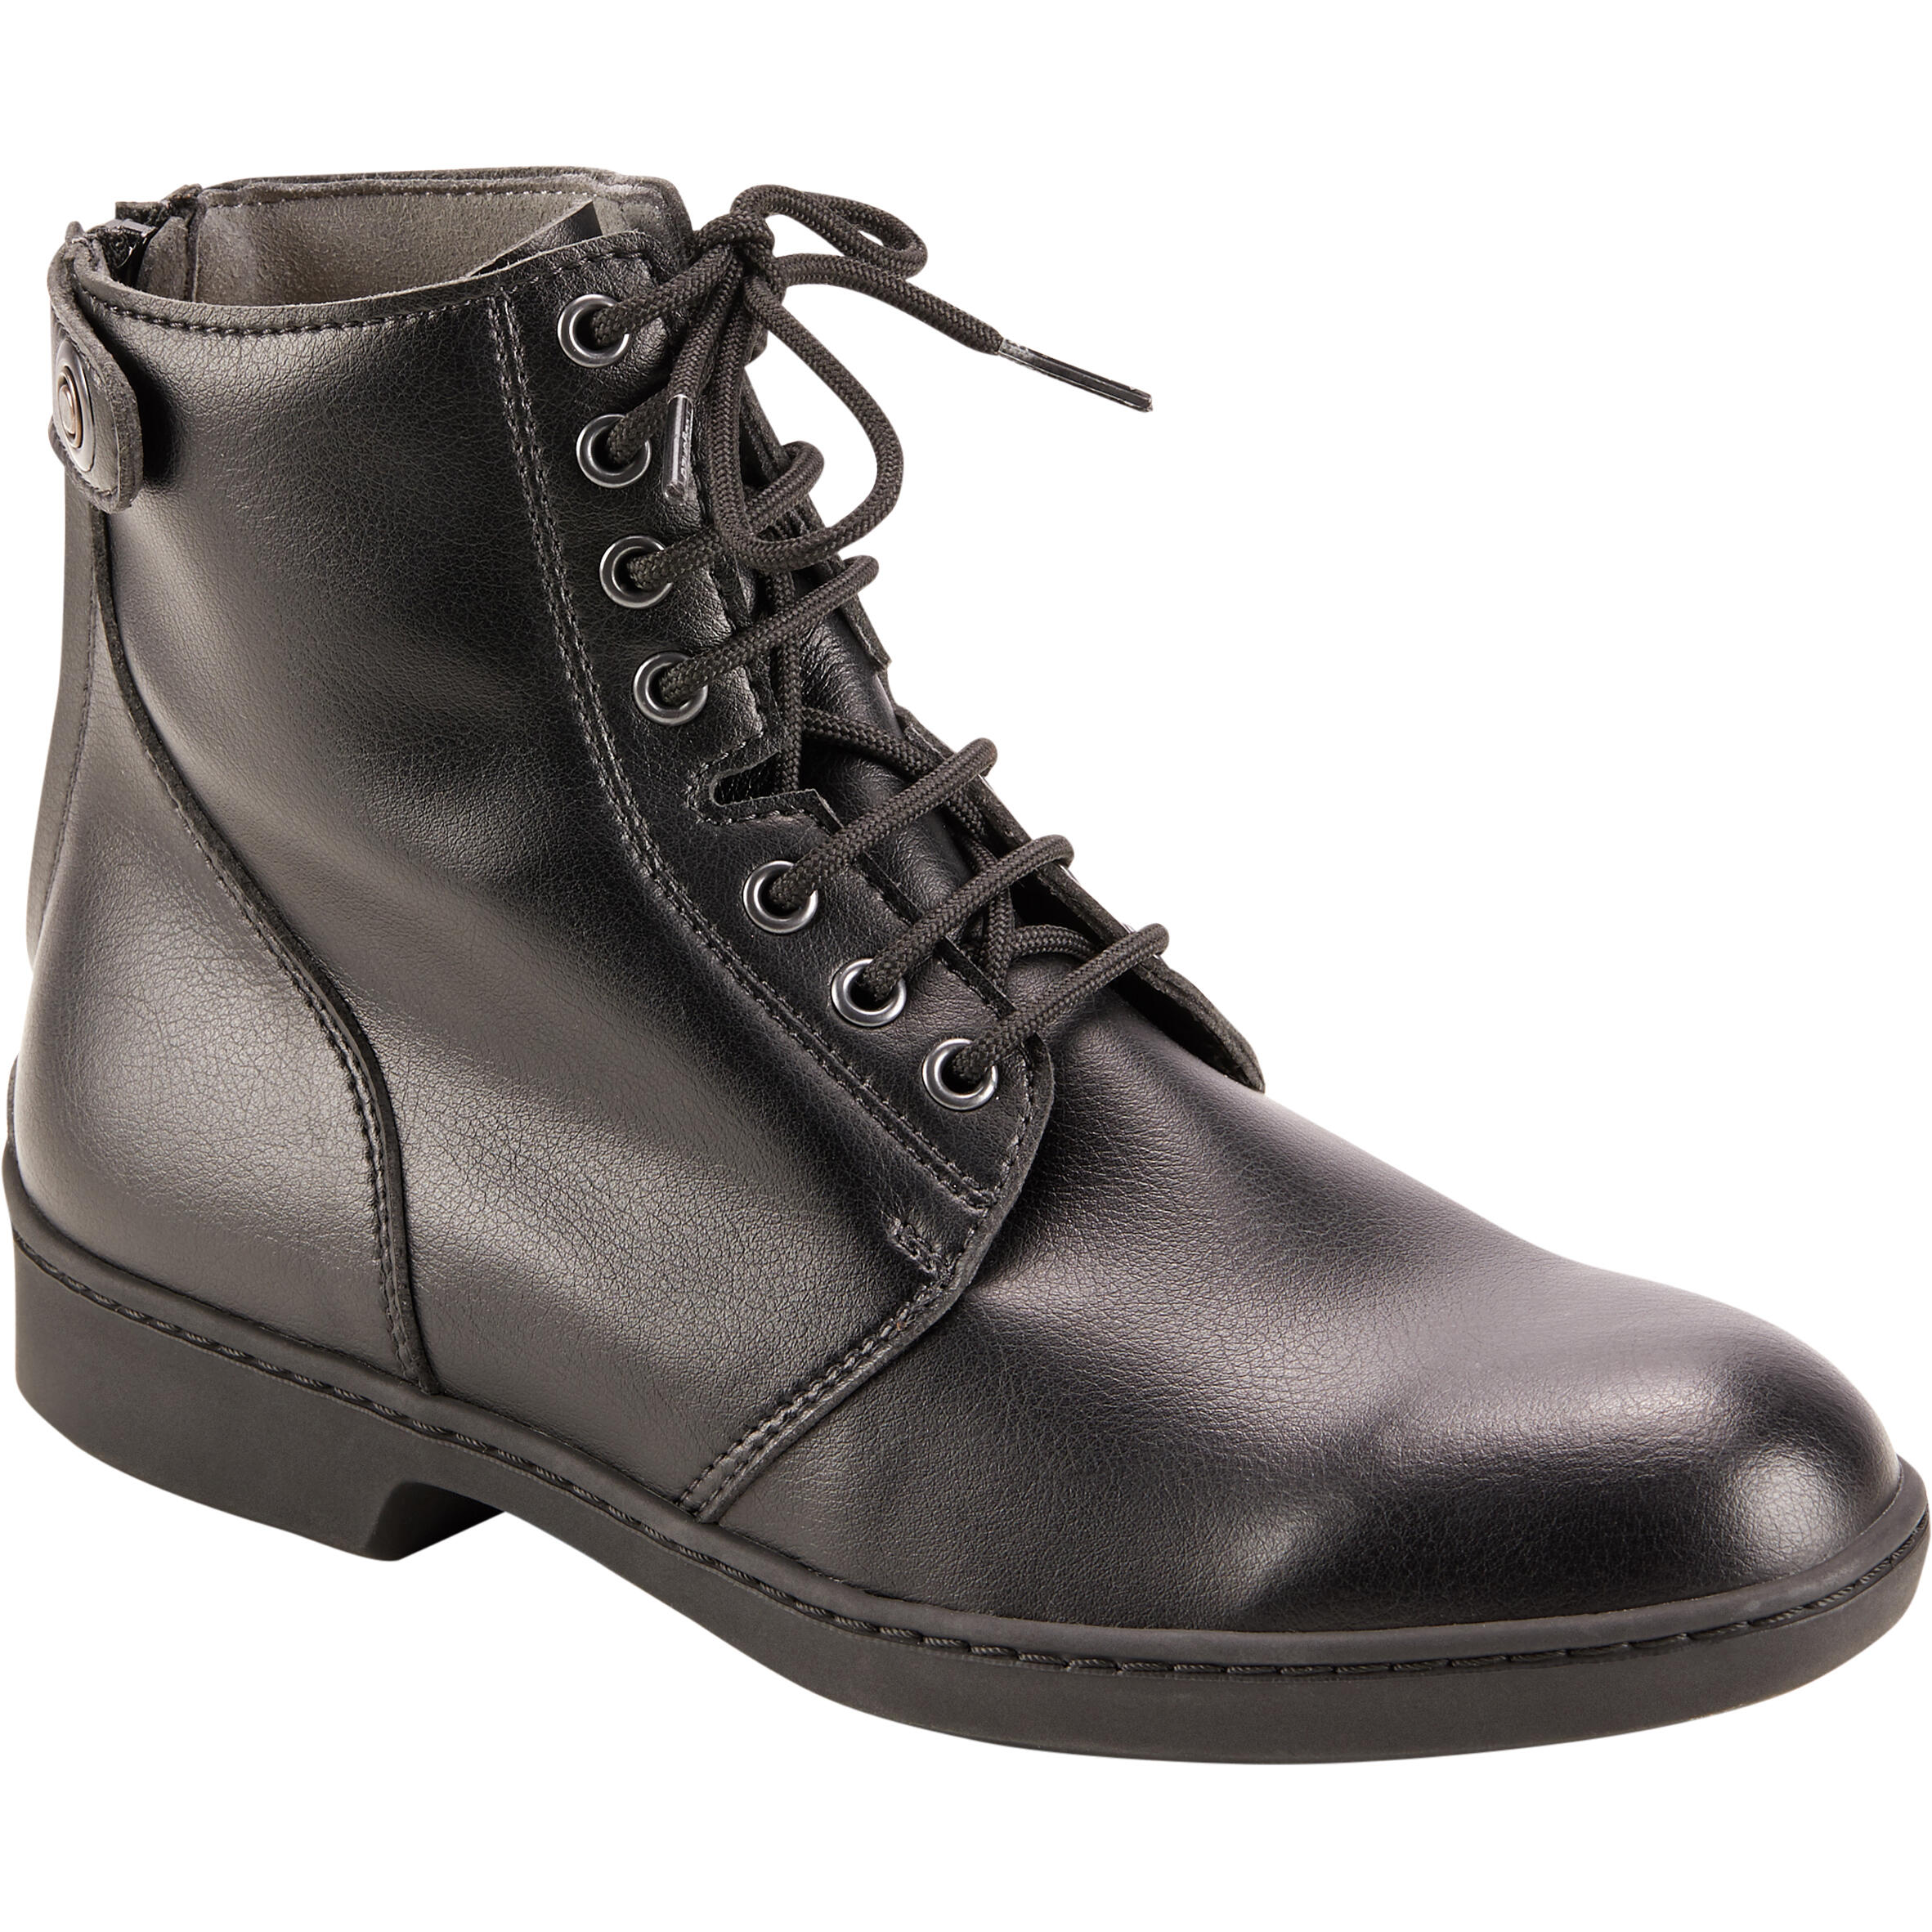 

500 Adult Lace-Up Horse Riding Jodhpur Boots - Black -  By FOUGANZA | Decathlon